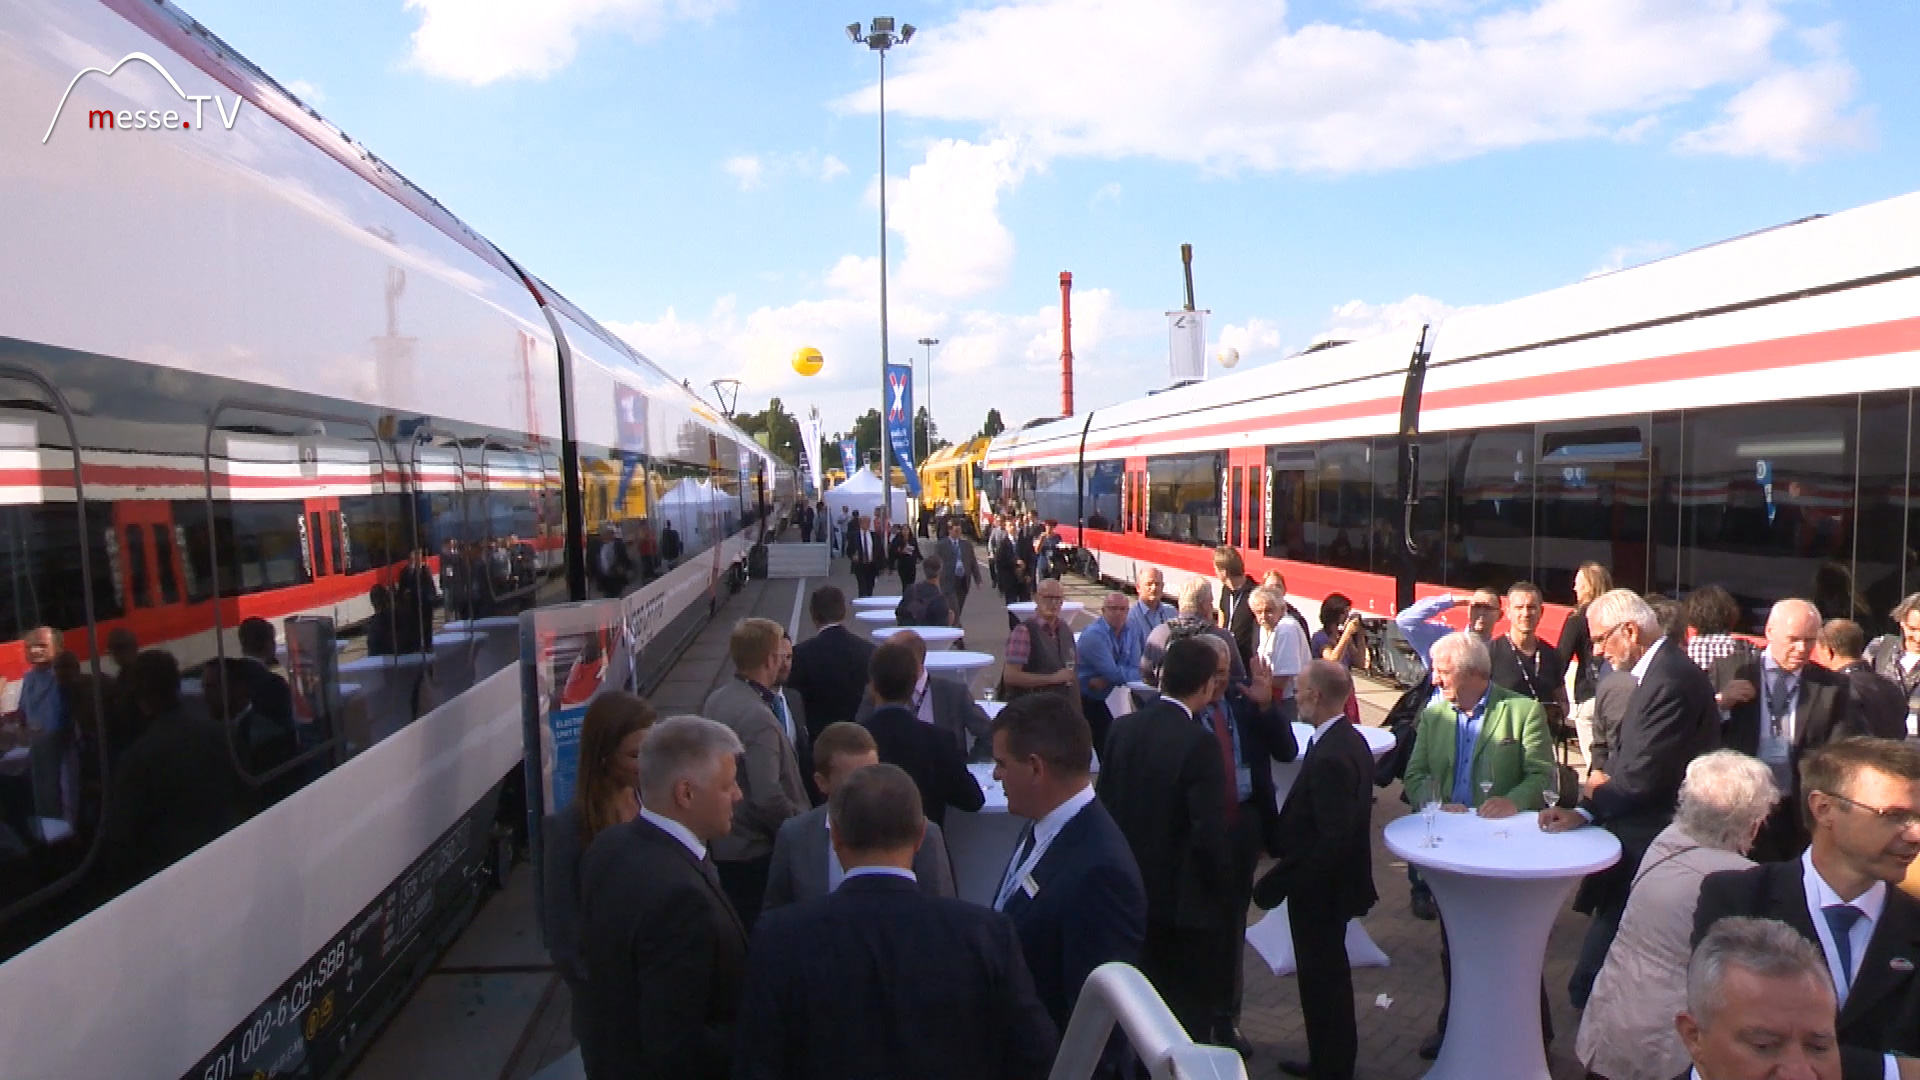 Trade fair appearance Stadler trains special feature of the EC250 high speed train